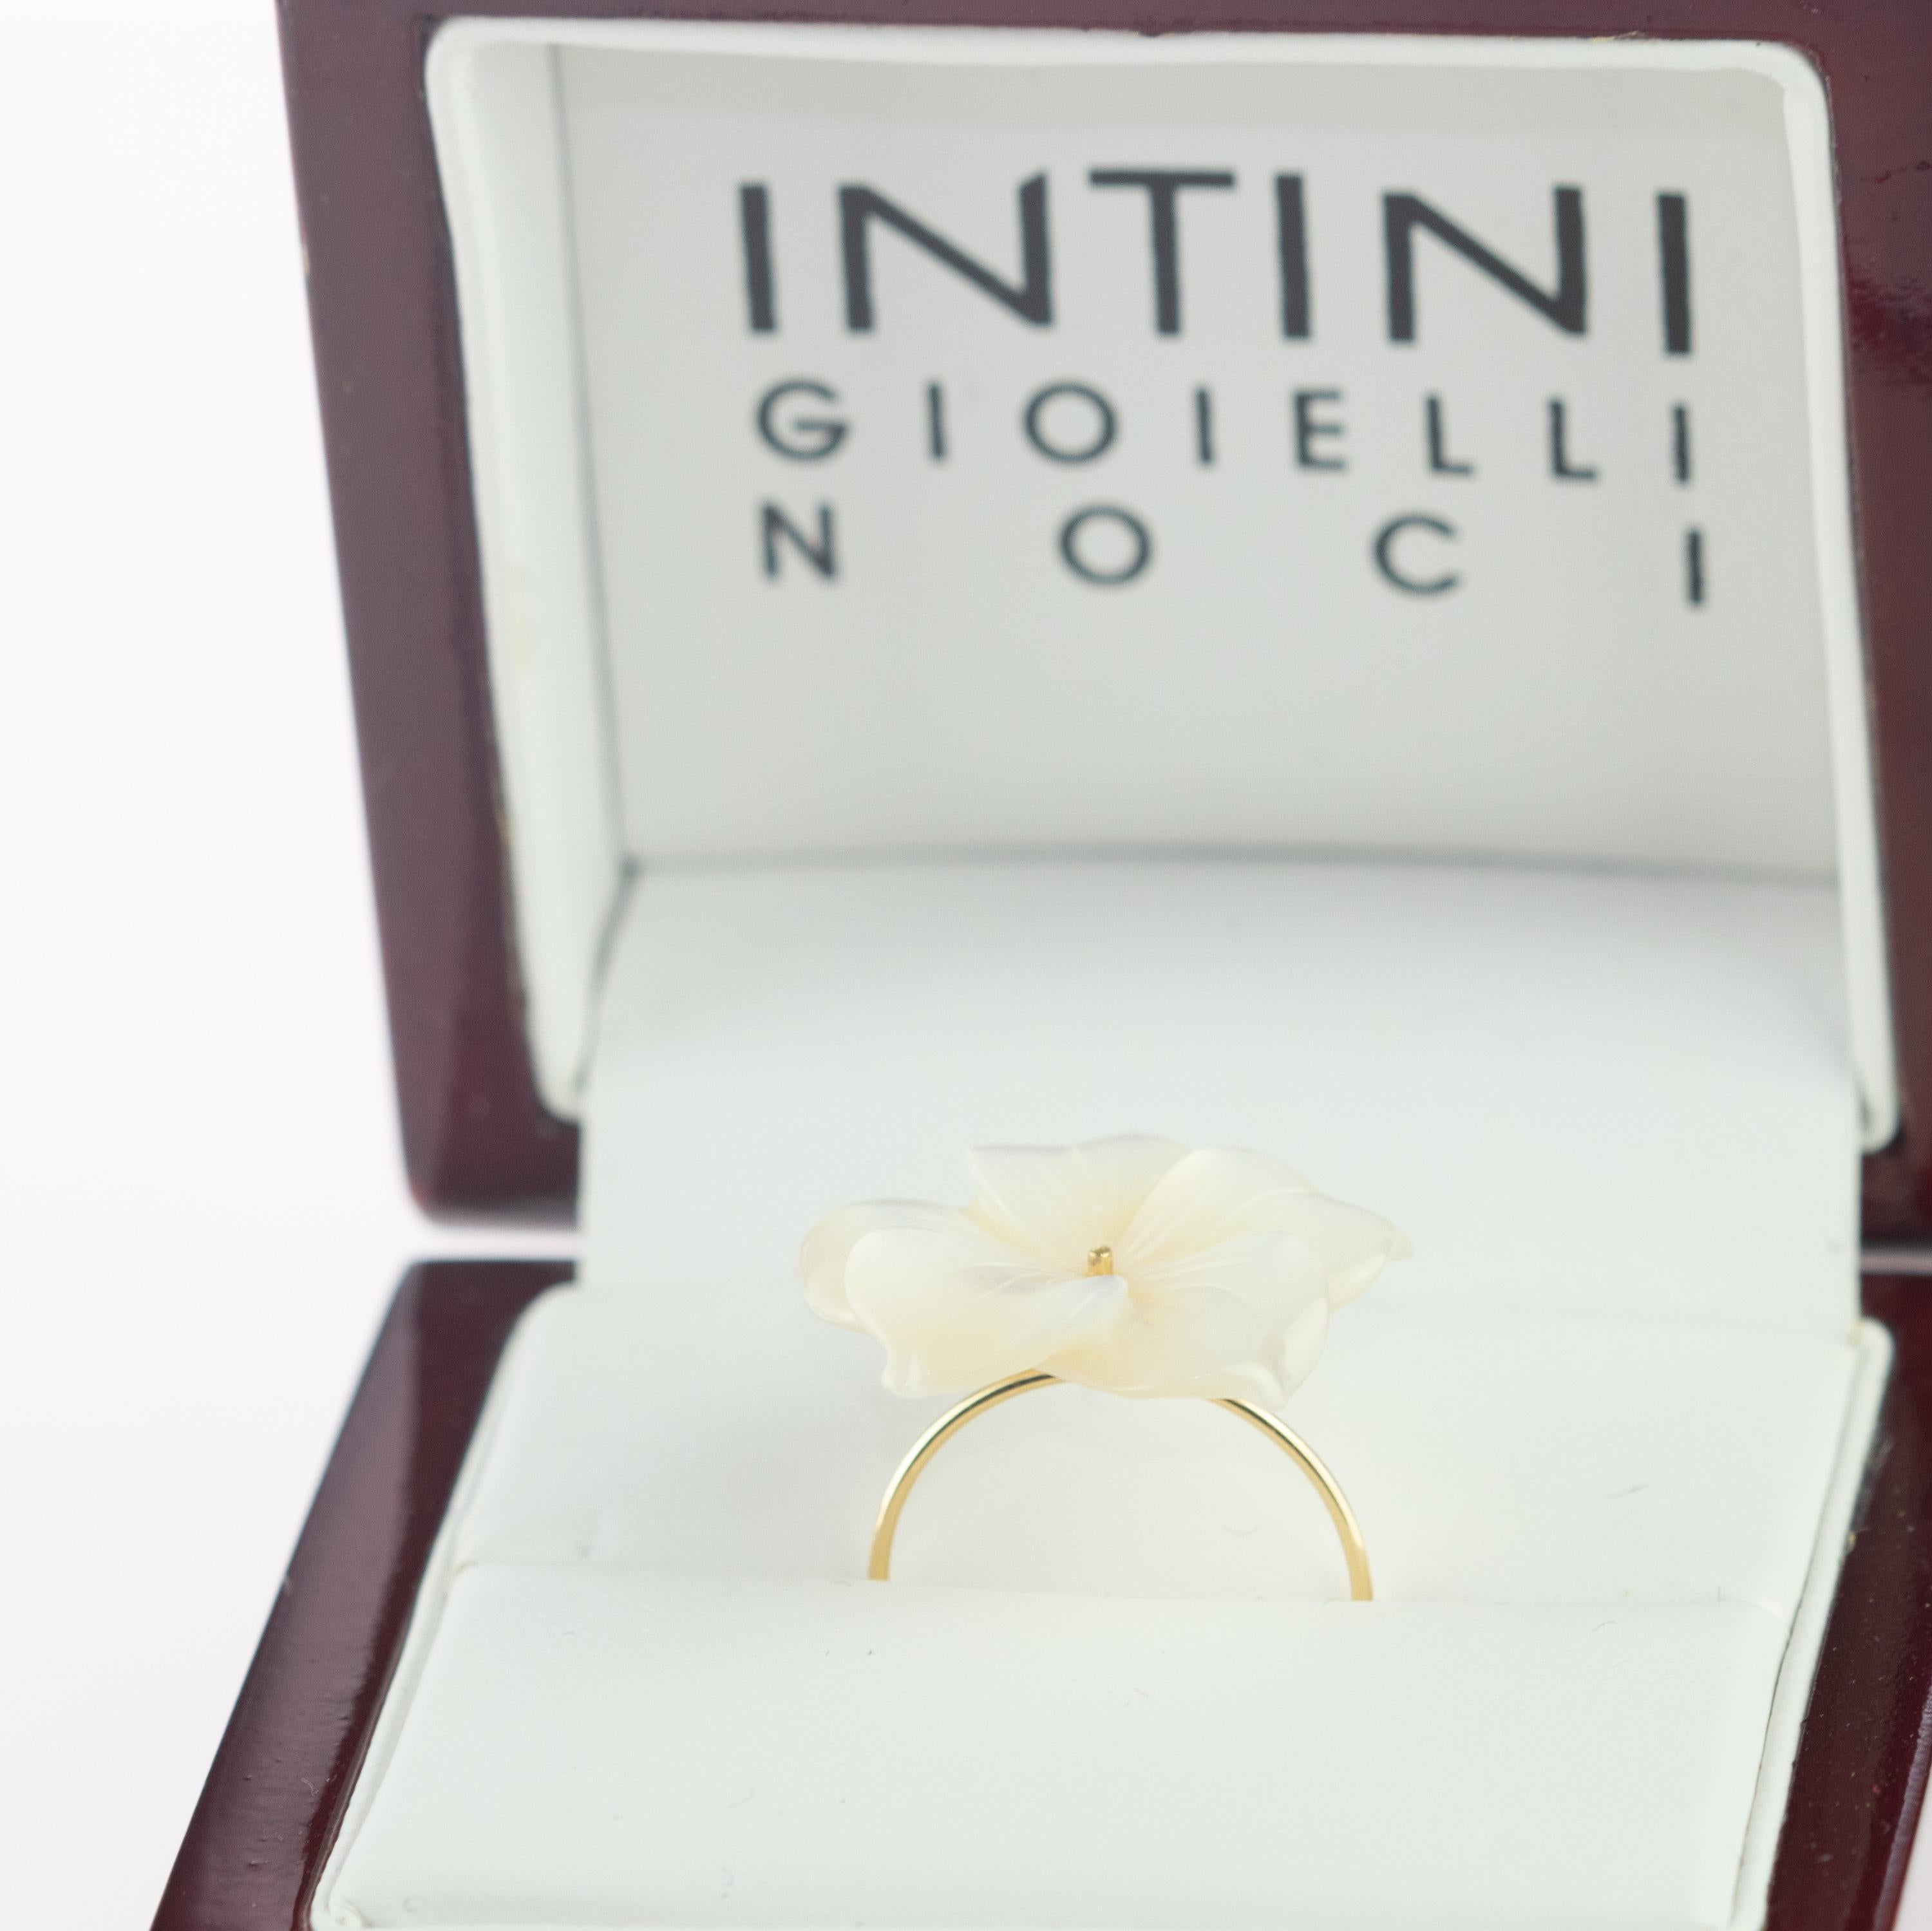 Astonishing and gorgeouis white mother pearl flower ring. Natural carved petals that evoke the italian handmade traditional jewelry work.
 
This delicate design shows the sweetness and innocence of the jewelry. It takes us to those first jewels